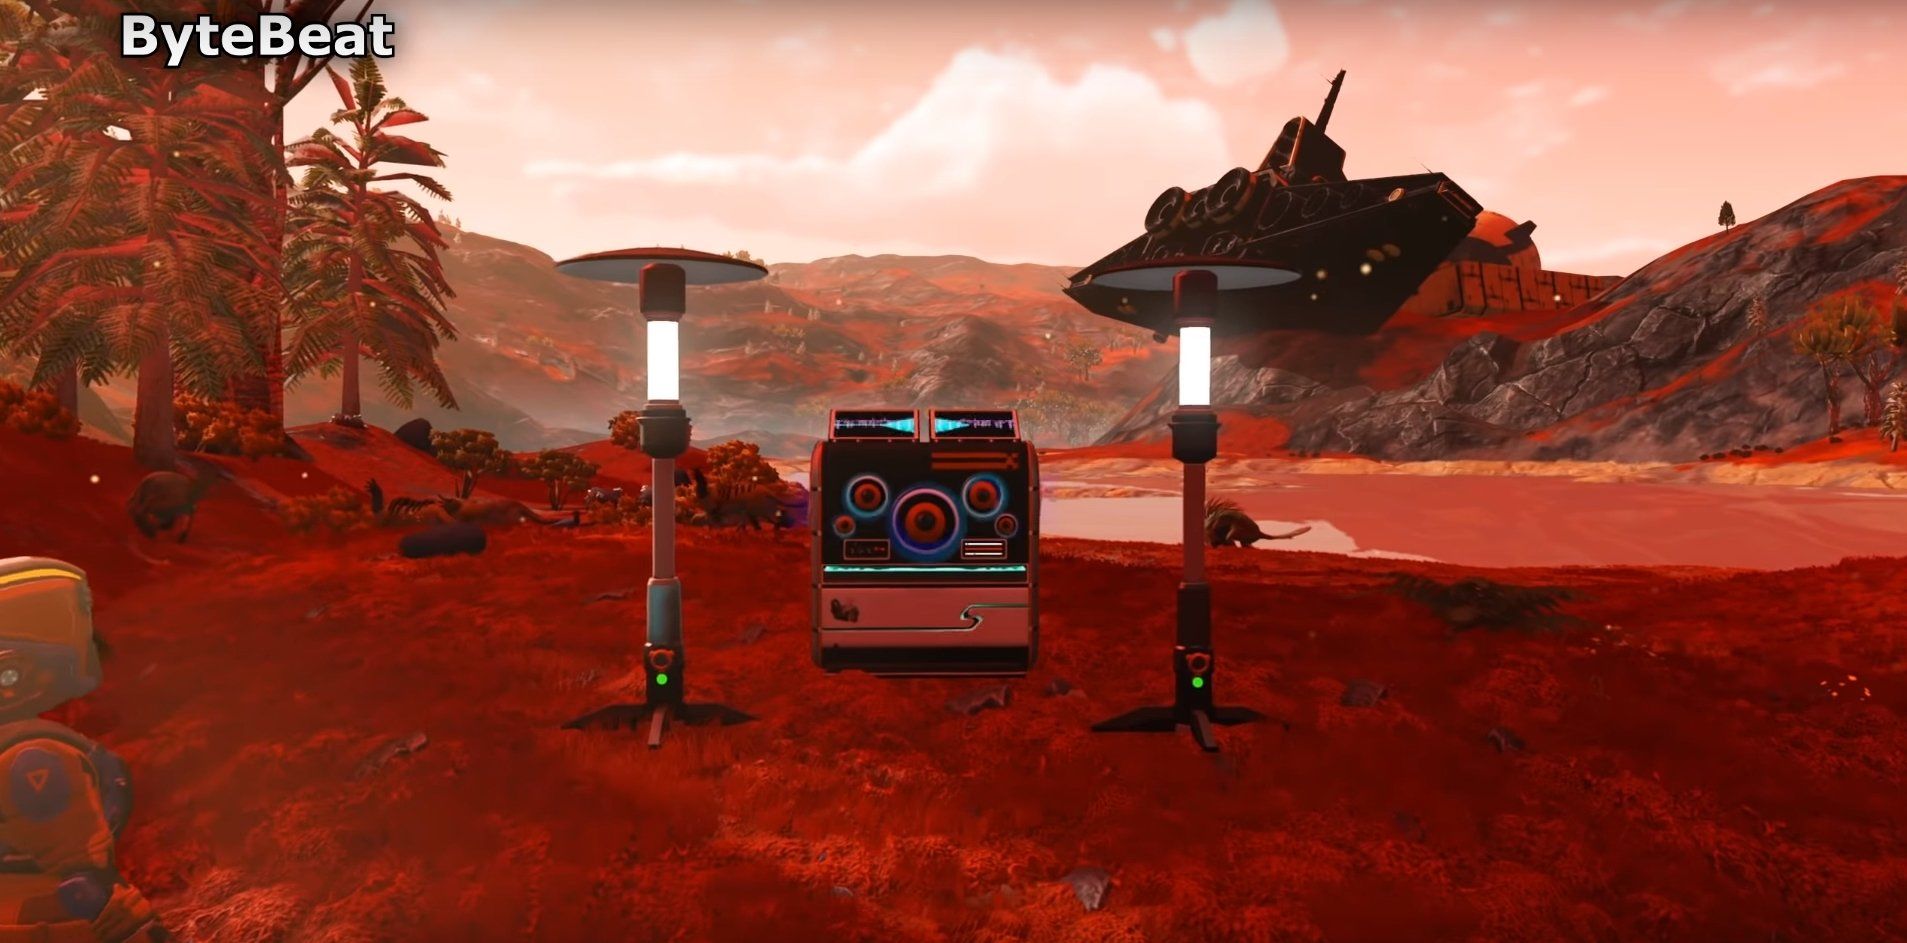 No Man’s Sky Drops Update 2.24, Adding ByteBeat to the Game